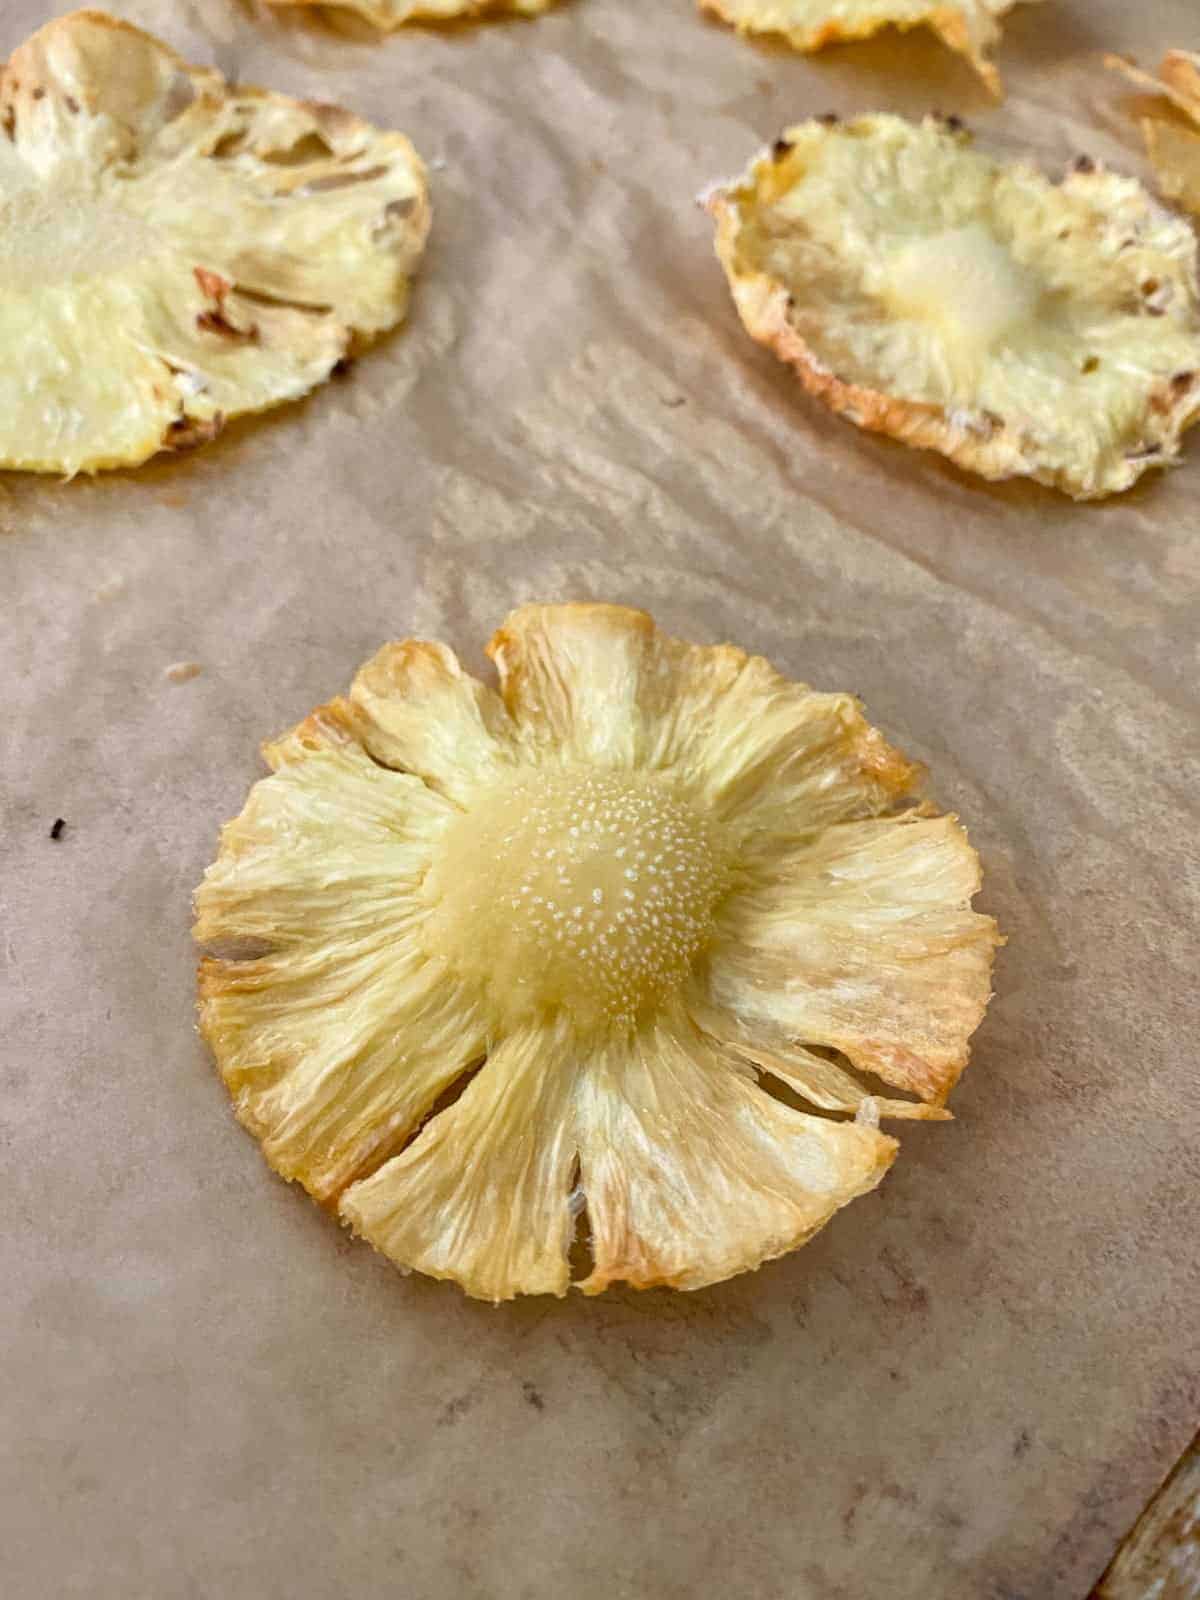 baked pineapple "flowers" on parchment paper